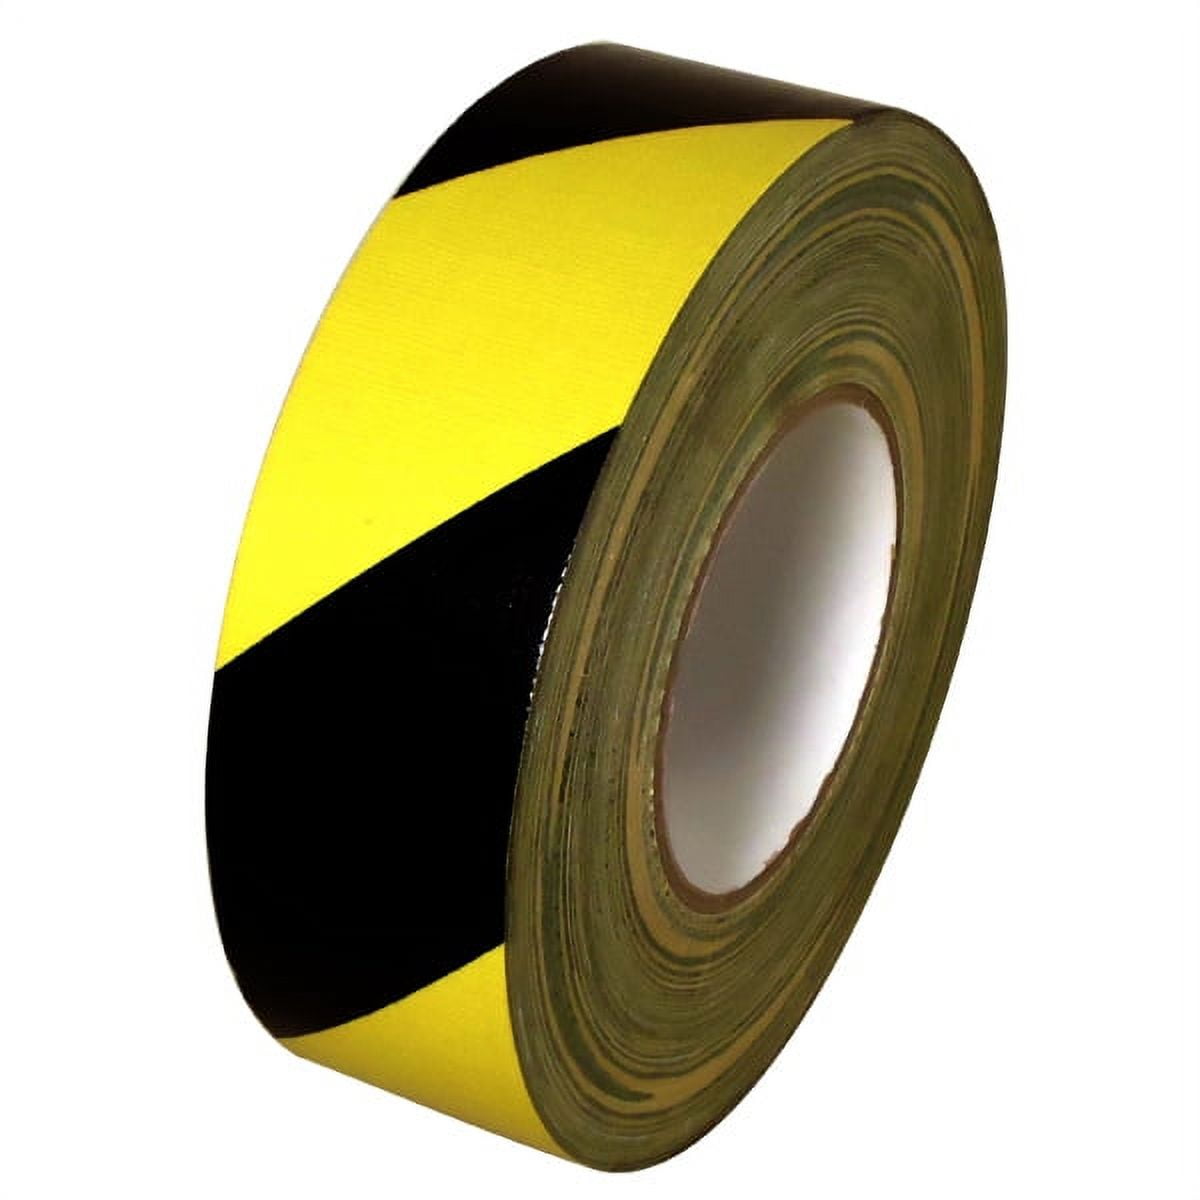 WOD DTC12 Stripe Safety Contractor Grade Black & Yellow Duct Tape 12 Mil, 1  inch x 60 yds. Waterproo…See more WOD DTC12 Stripe Safety Contractor Grade